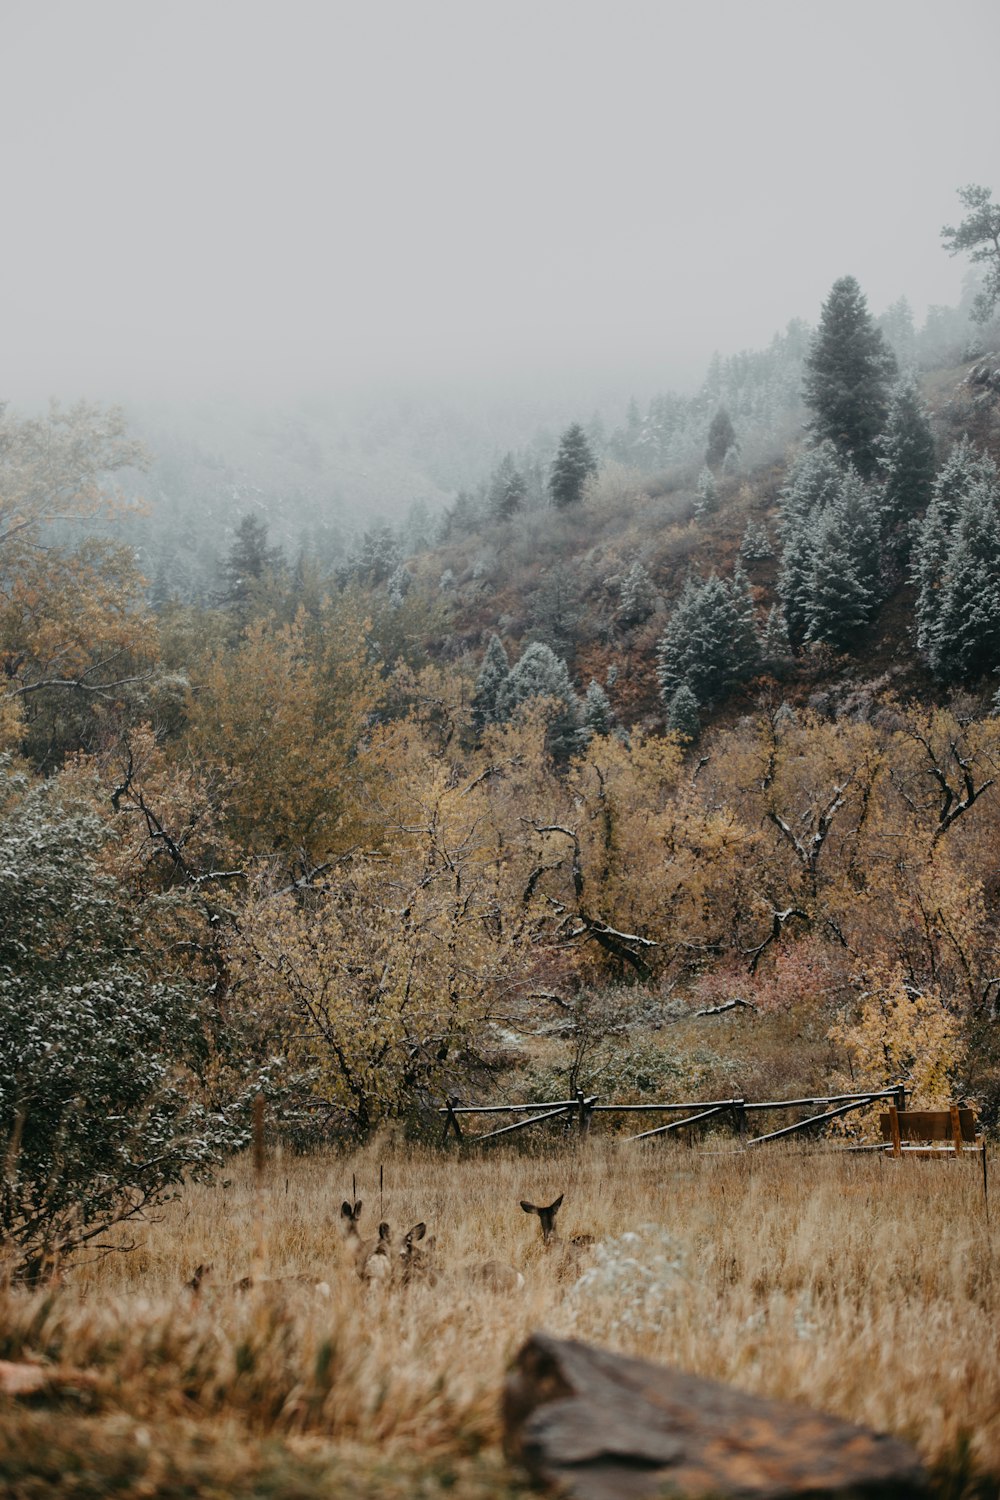 deer on grass beside mountain with trees during daytime